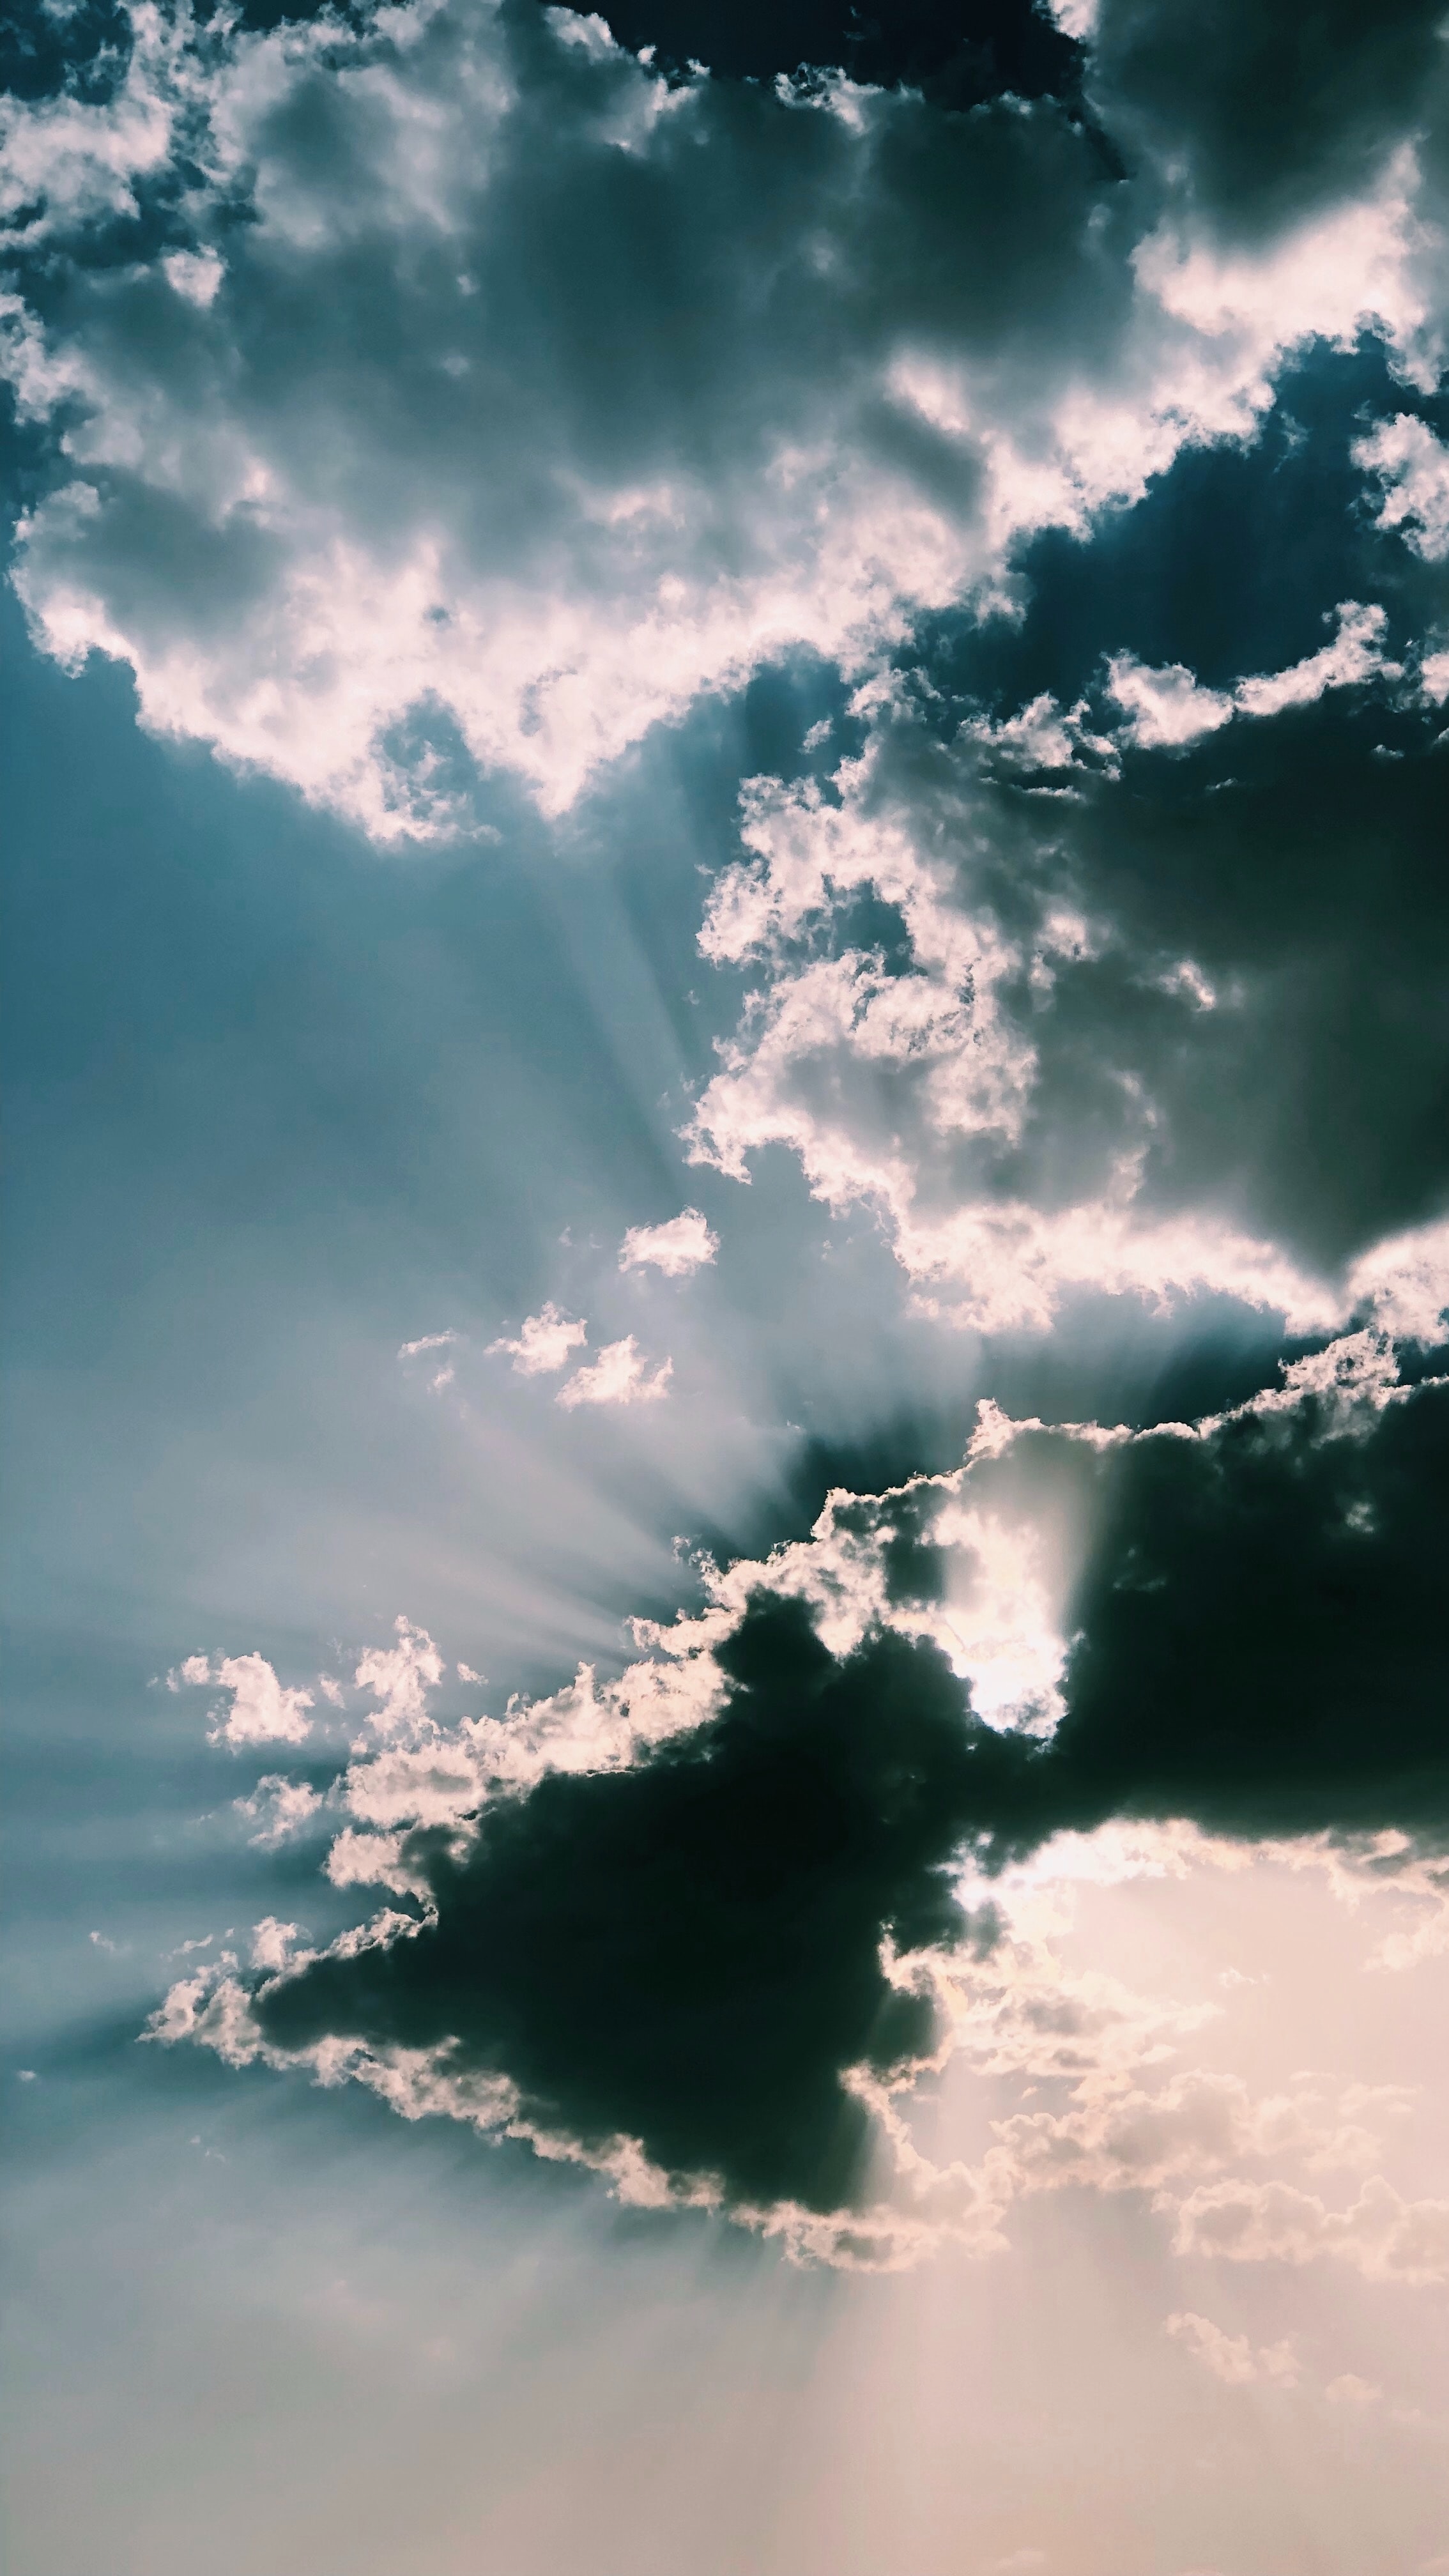 Download wallpaper 2268x4032 clouds, rays, sky hd background